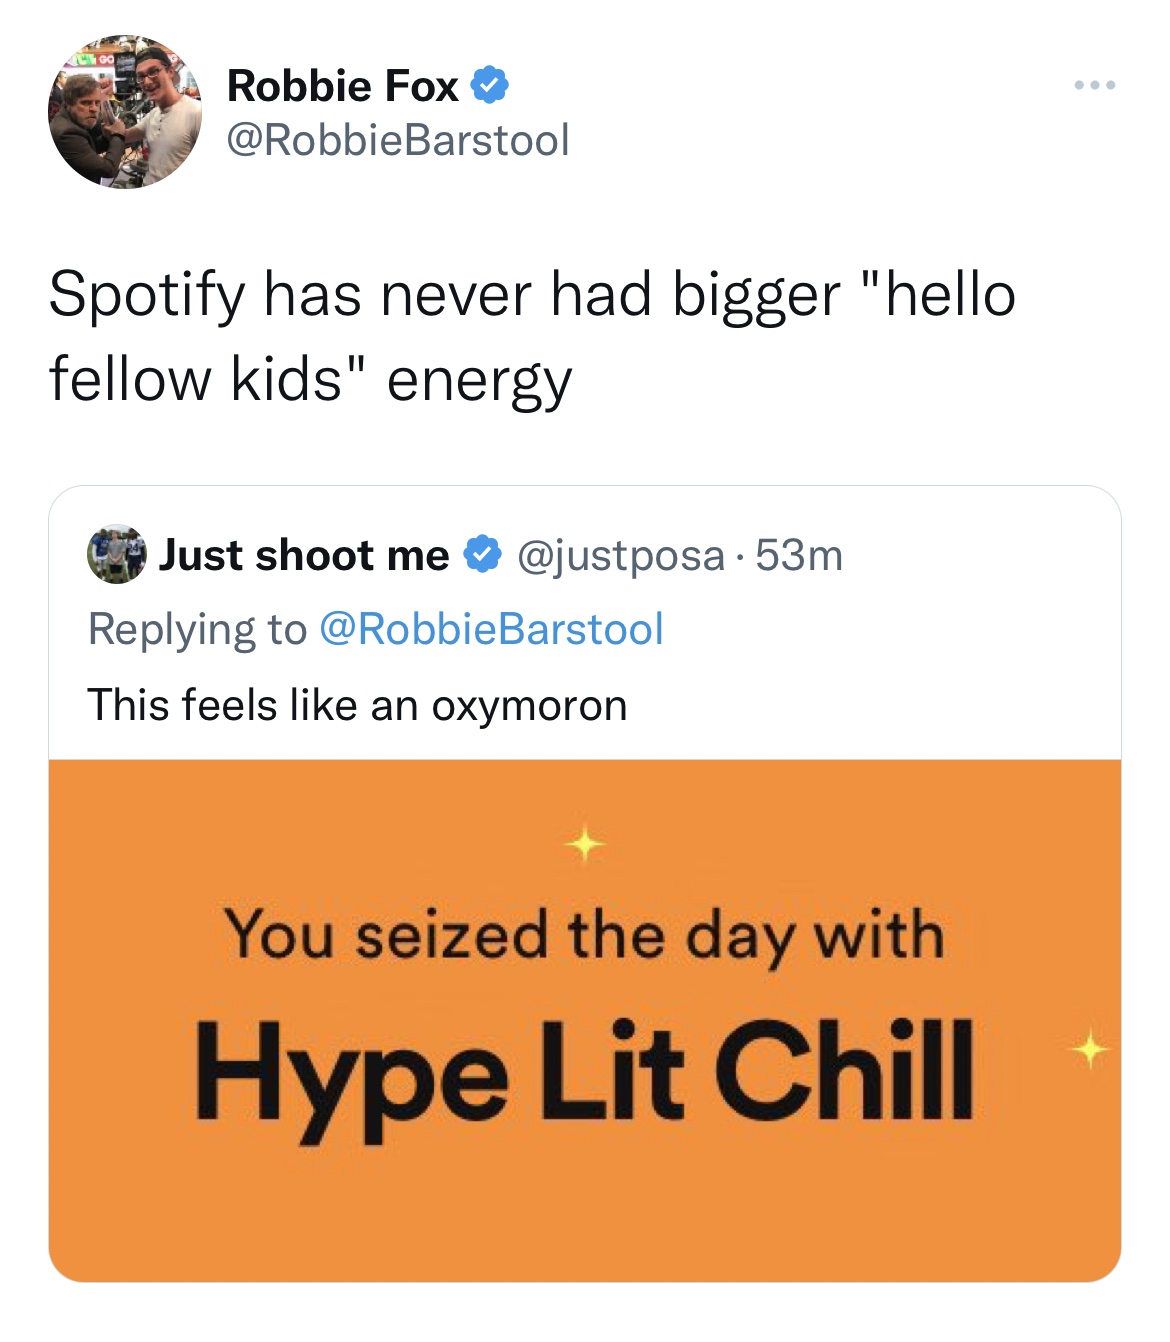 Spotify Wrapped Memes - orange - 400 Robbie Fox Spotify has never had bigger "hello fellow kids" energy Just shoot me . 53m This feels an oxymoron You seized the day with Hype Lit Chill